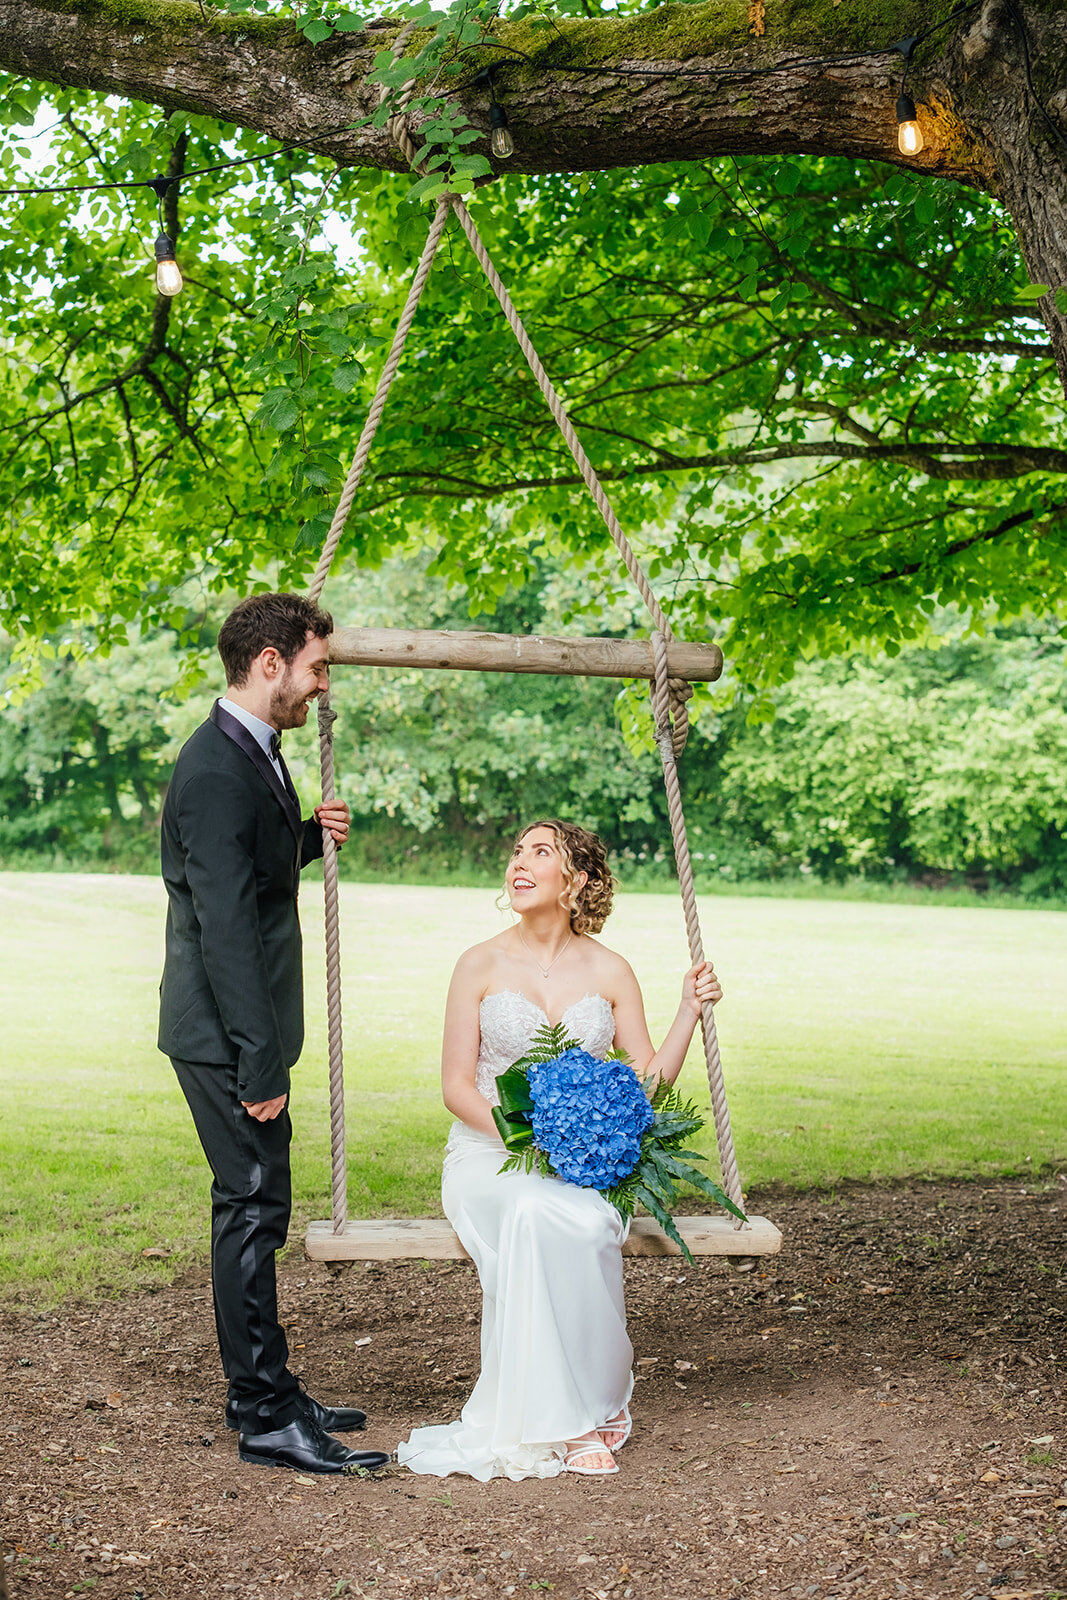 Kilminorth Cottages styled wedding shoot - Charlie Flounders Photography -0318